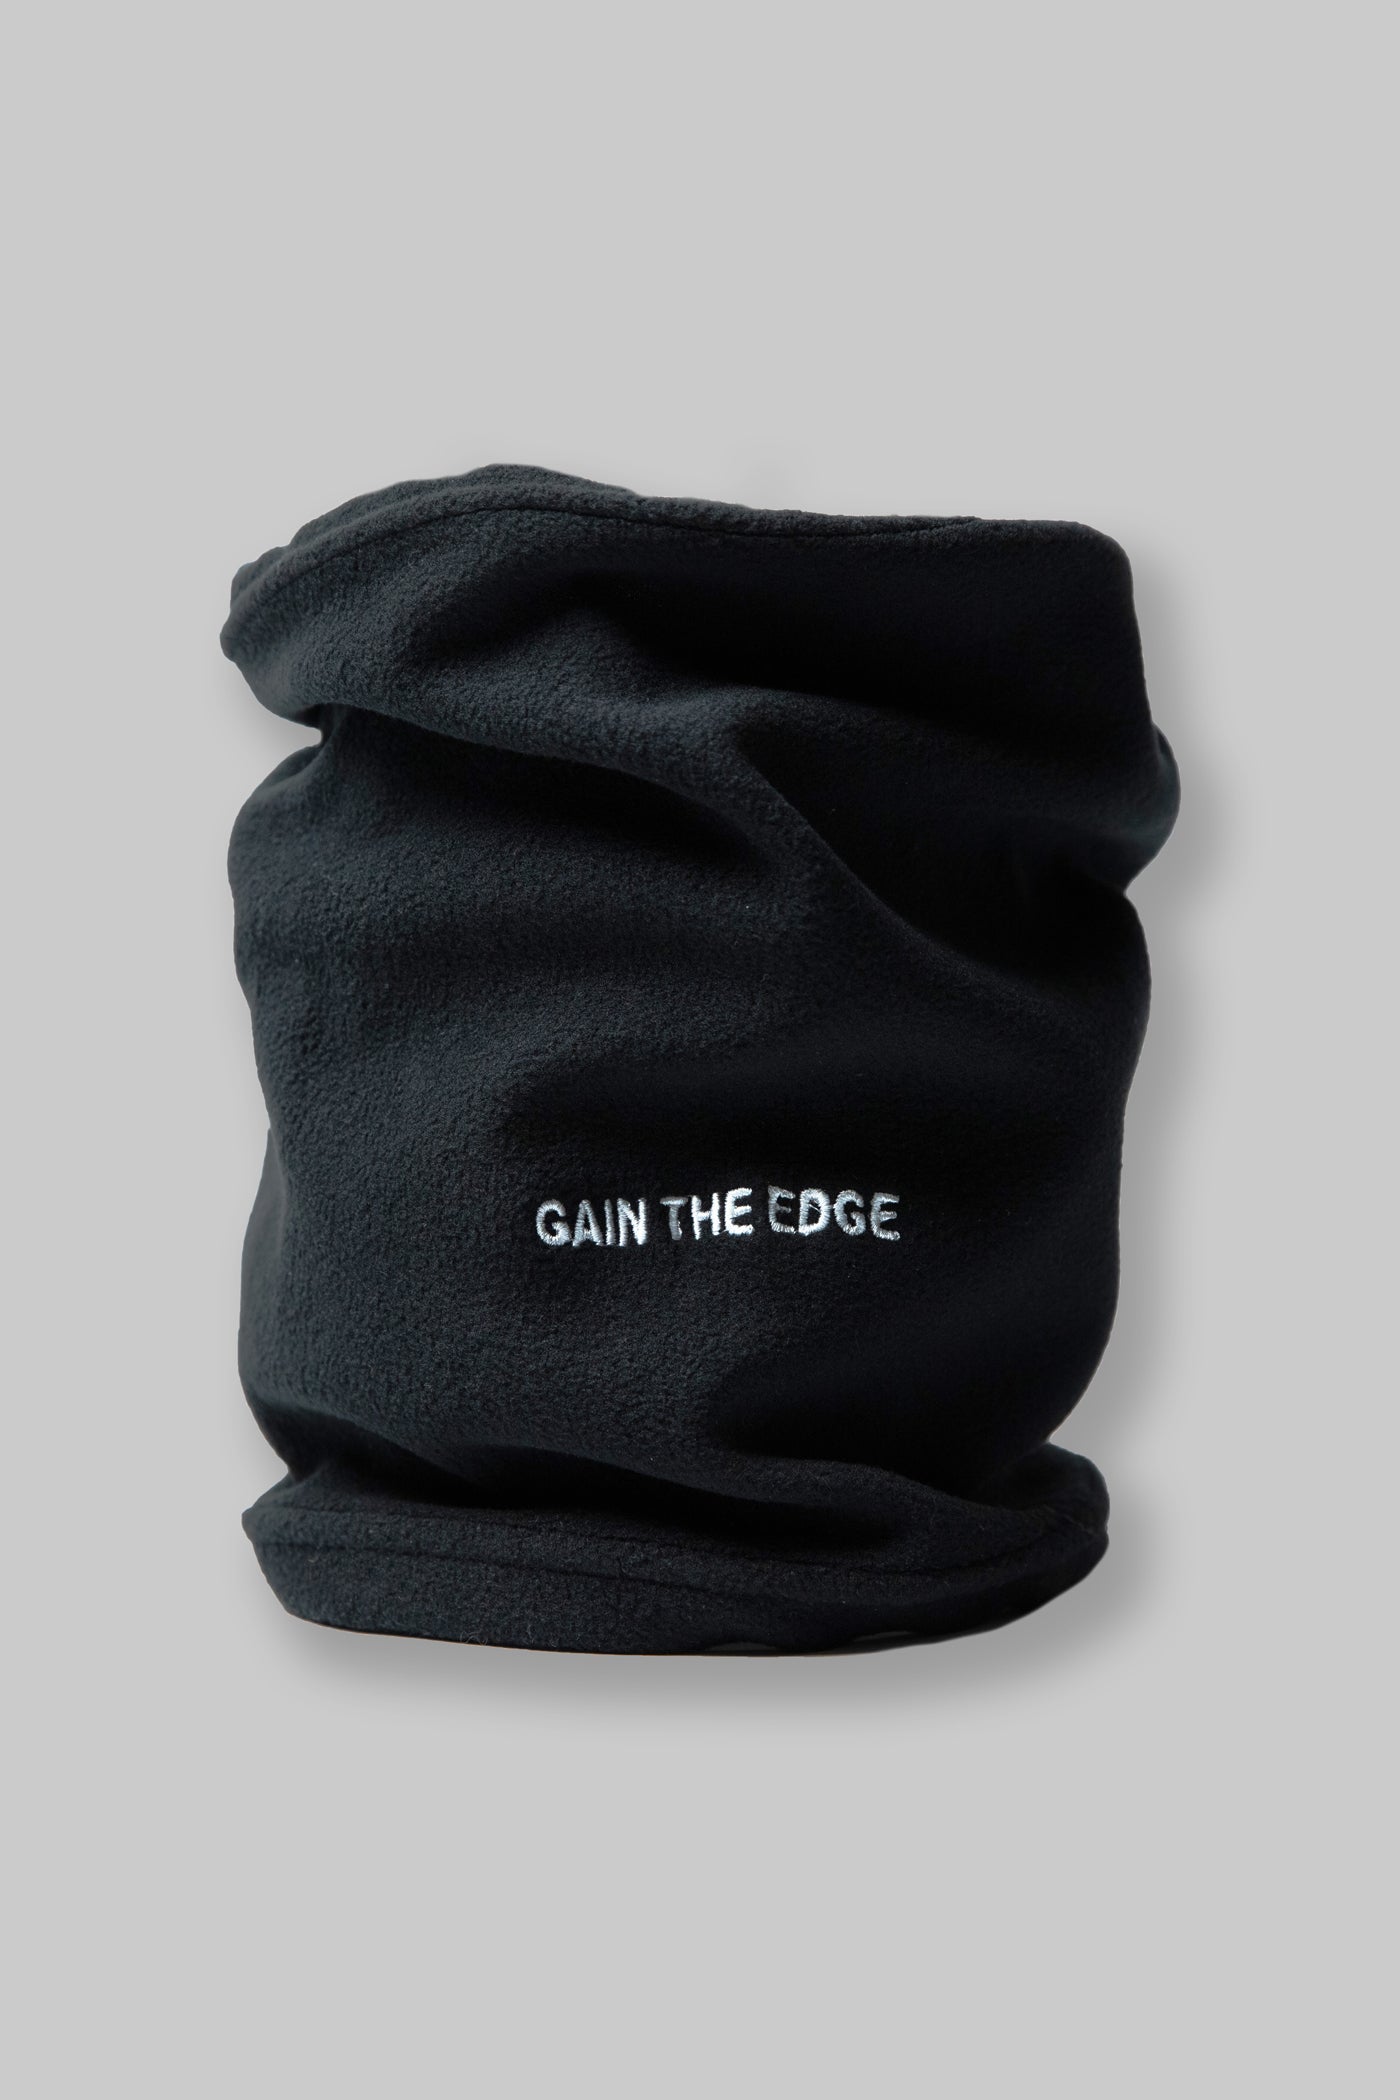 Neck Warmer - Gain The Edge Official